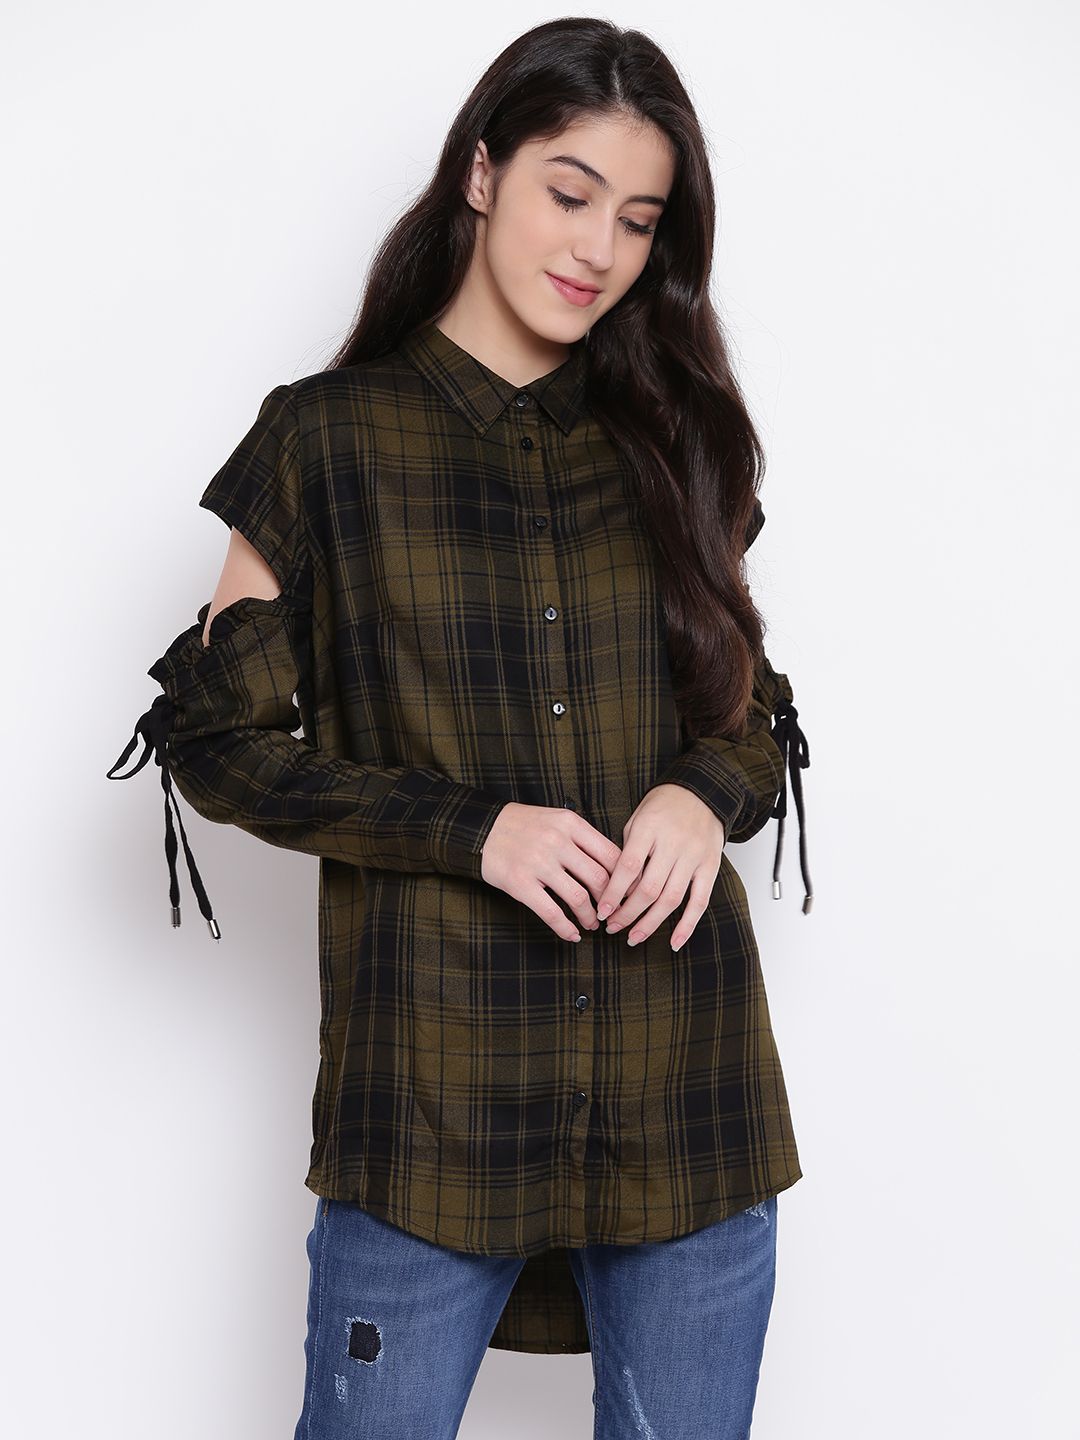 ONLY Women Olive Green & Black Checked Shirt Style Top Price in India